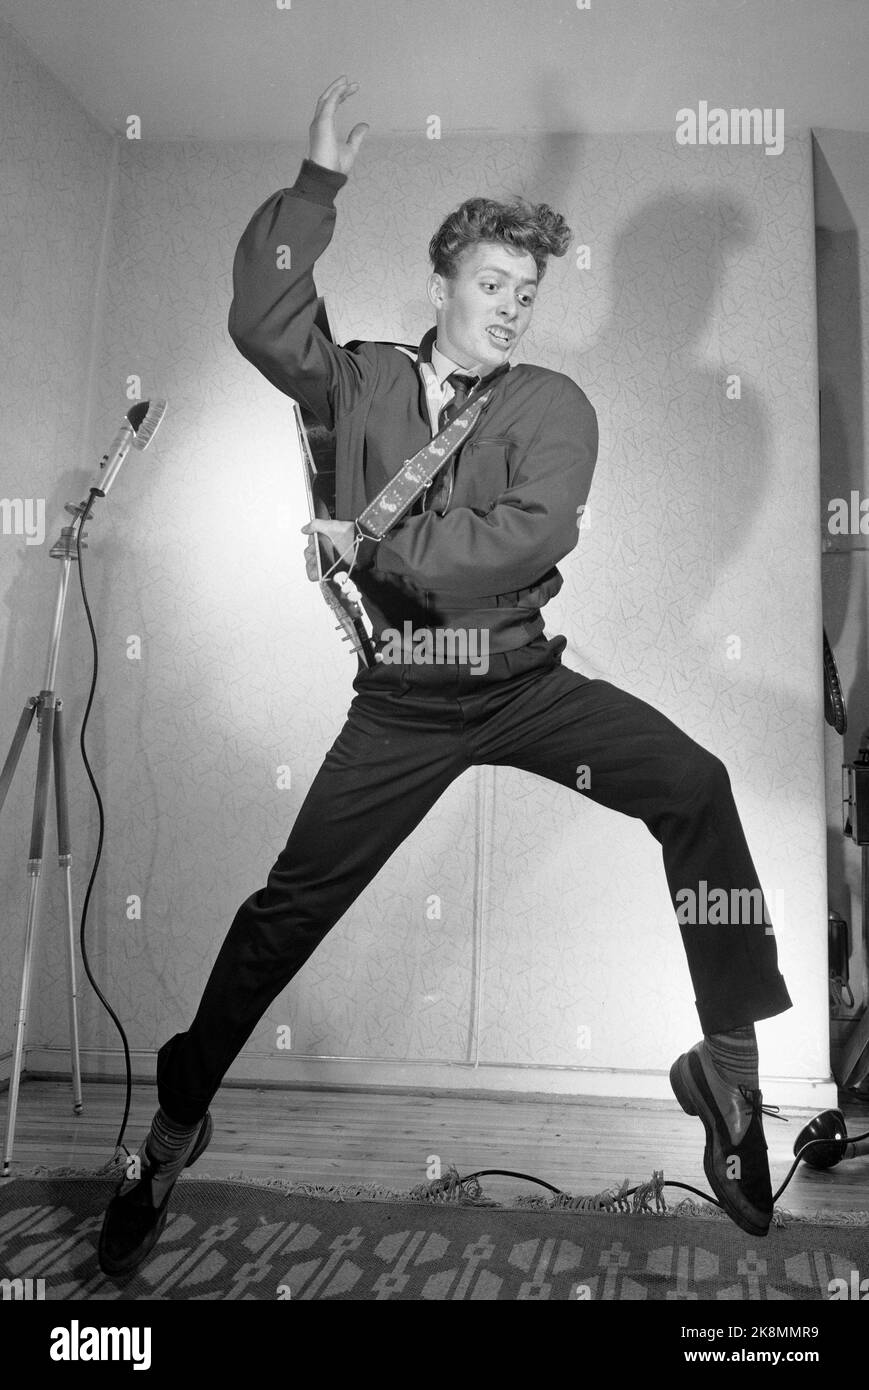 Oslo 195808 The rock is raging in Norway, and Per Elvis Granberg / Per Granberg rocks the teens in the sink. Here Per Elvis in action with guitar and hefty dance. Photo: Storløkken / Current / NTB Stock Photo